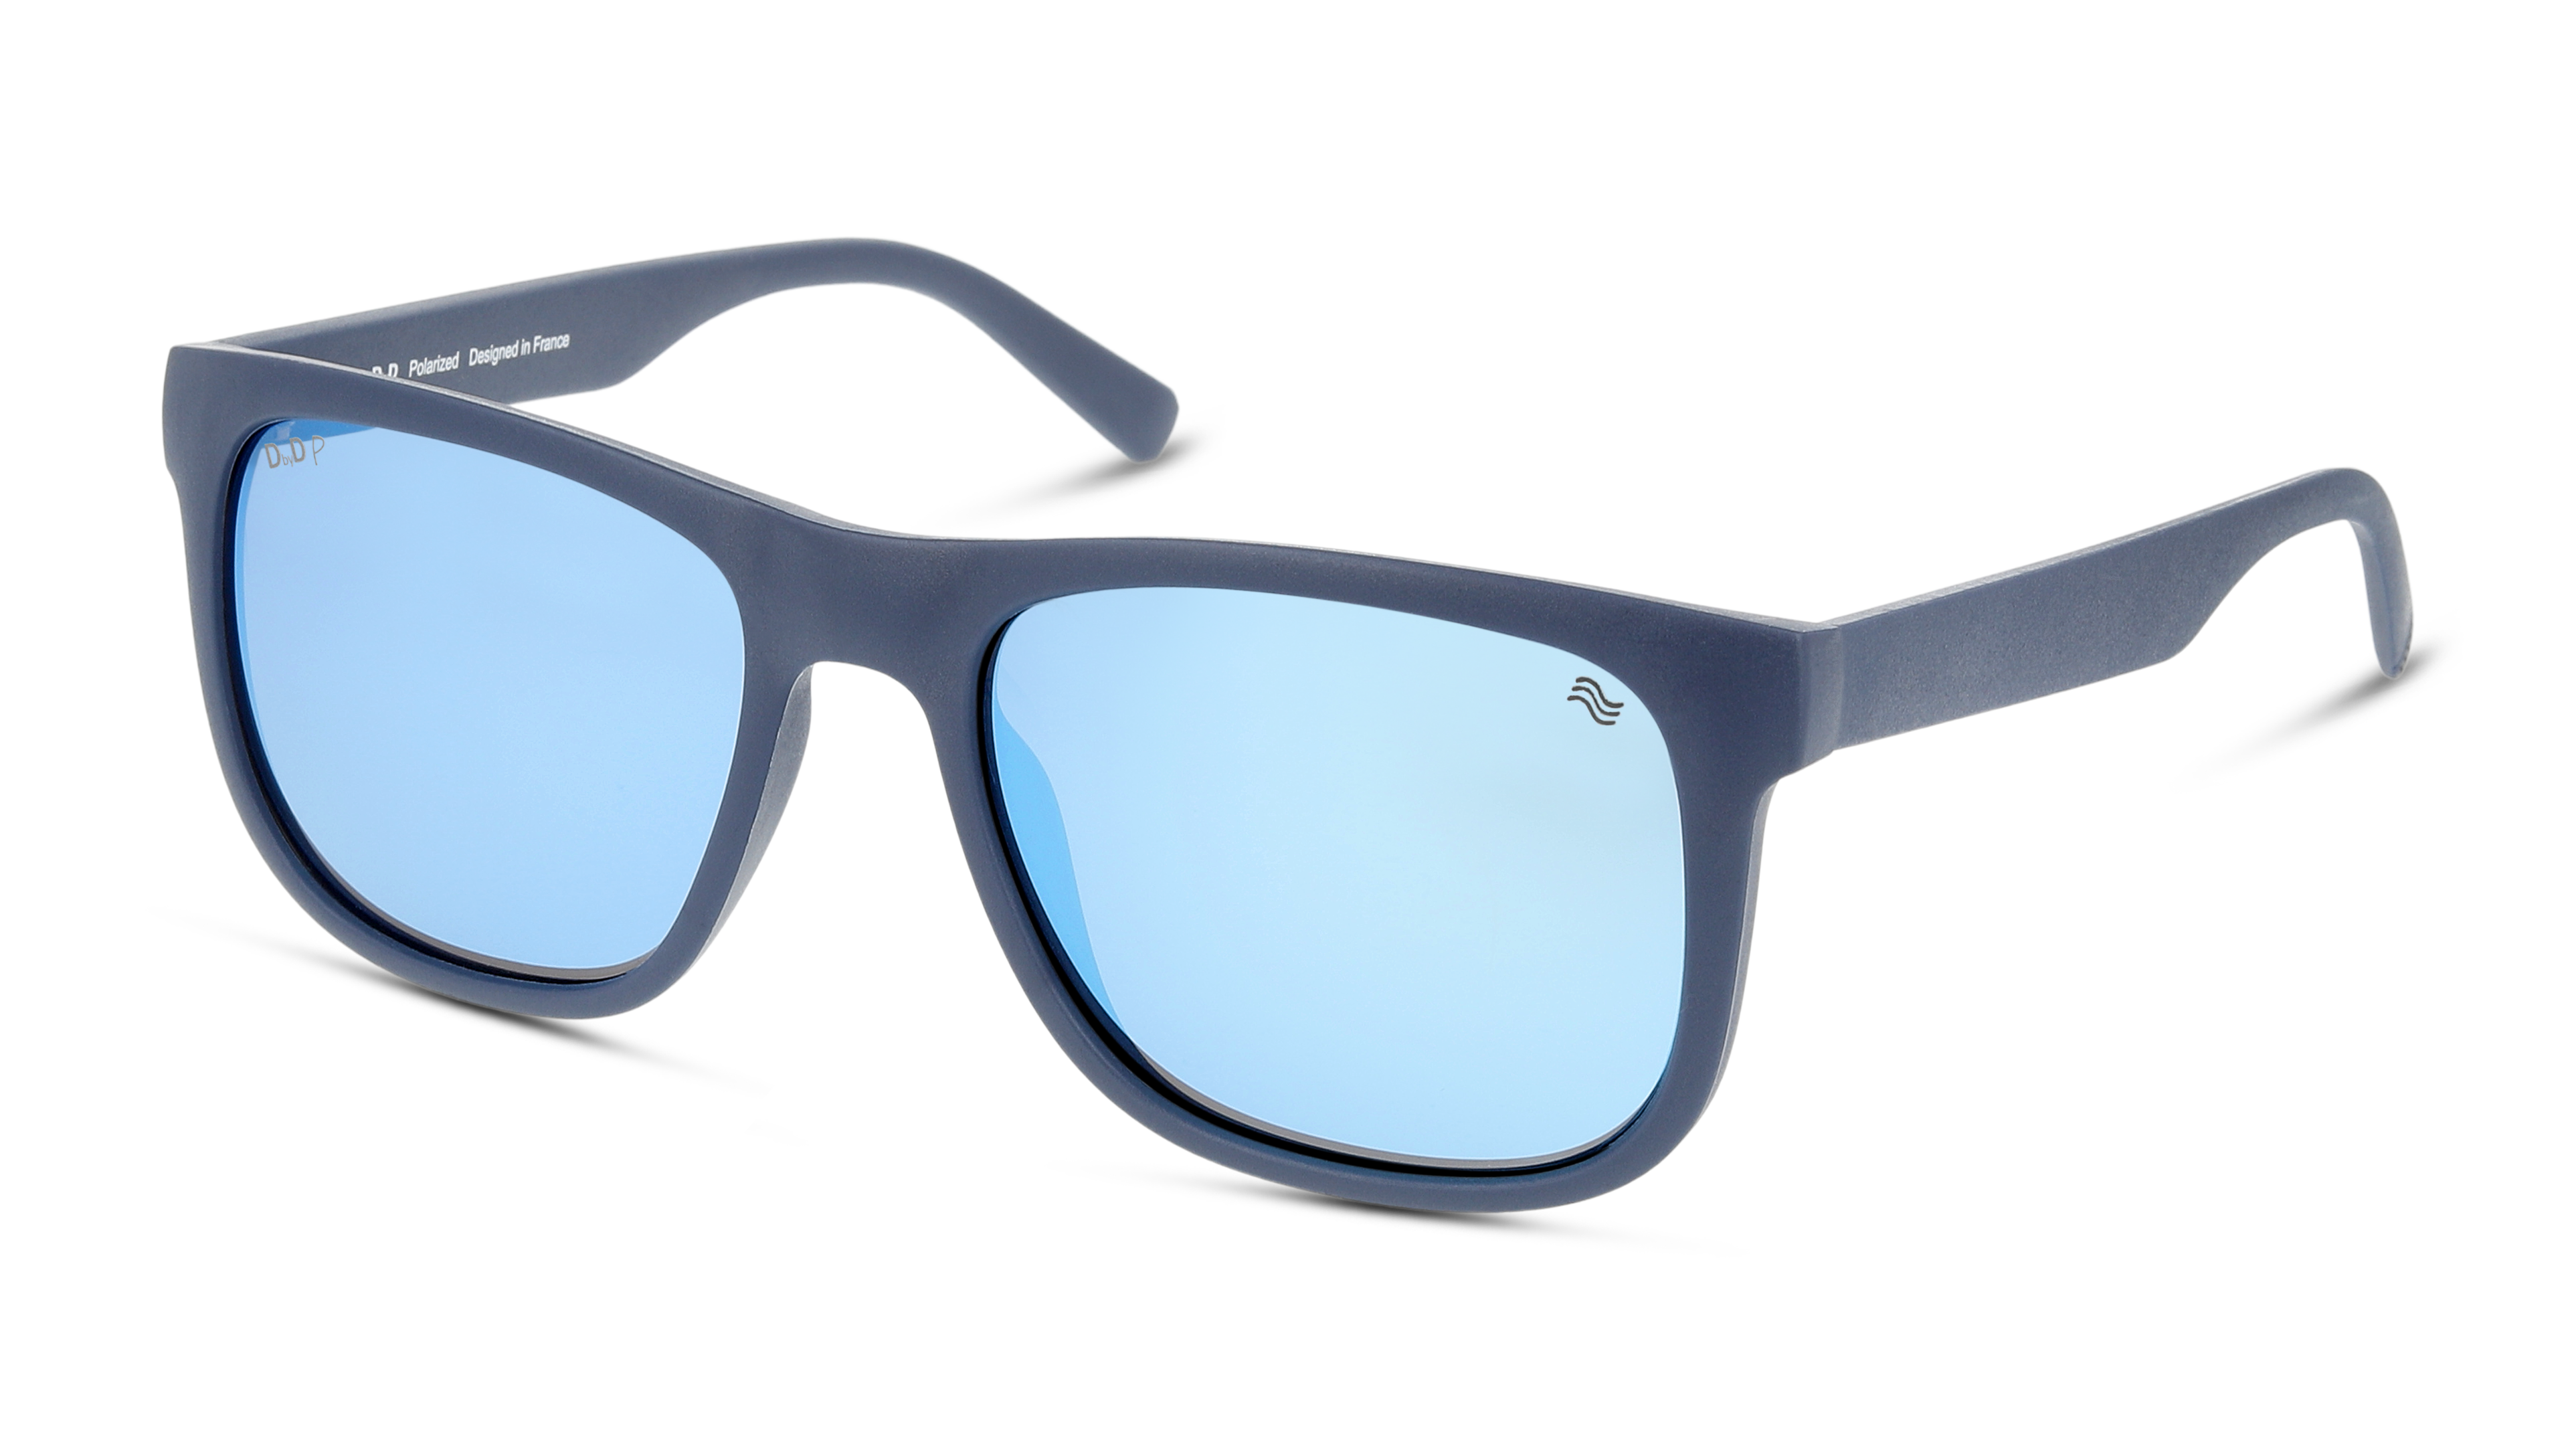 Angle_Left01 DbyD Recycled DB SM9011P Sunglasses Grey / Blue